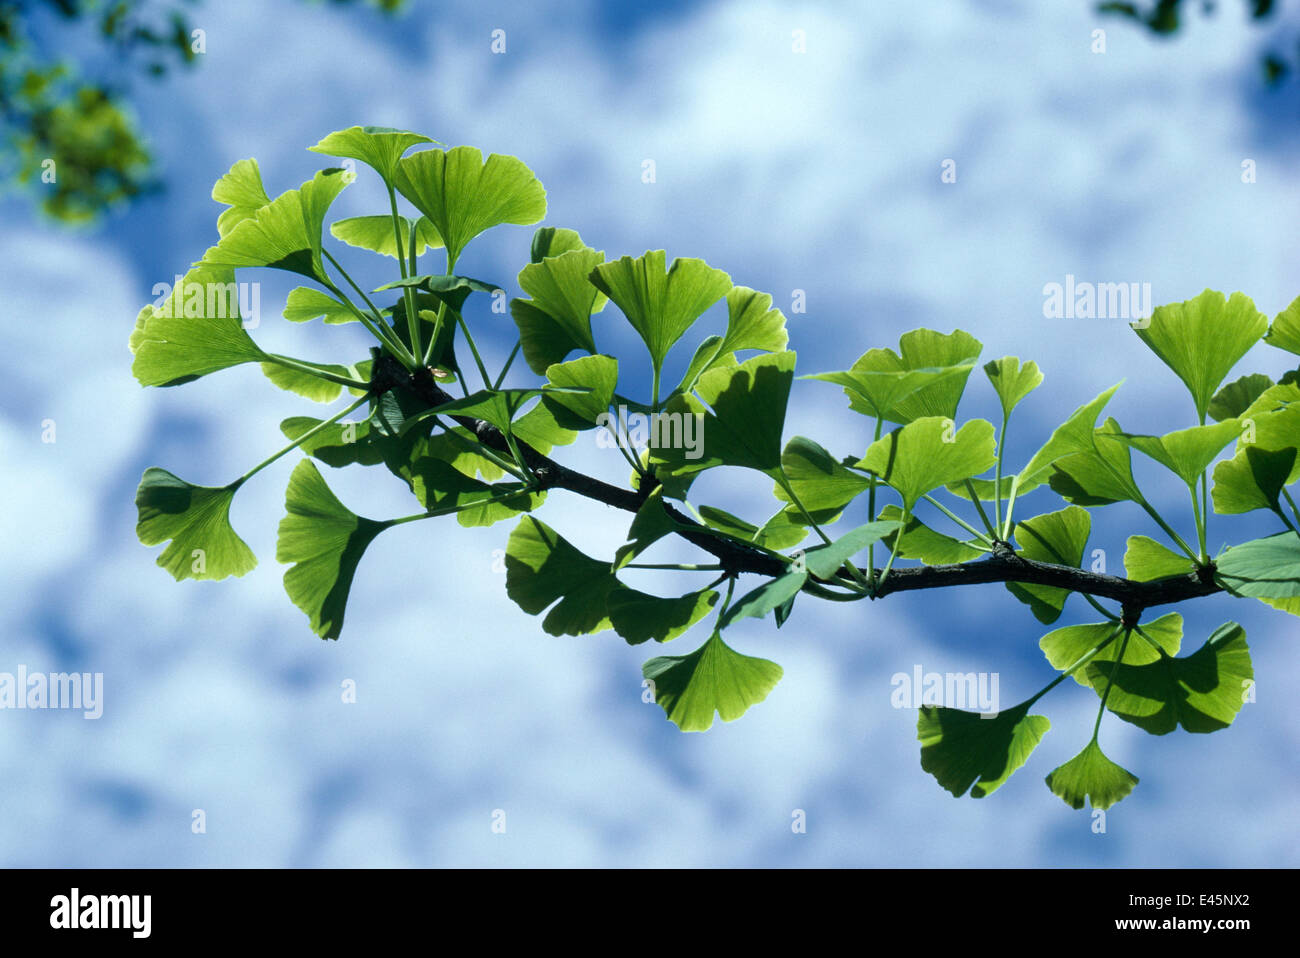 Leaves of the Ginkgo tree (Ginkgo biloba) native to Central China Stock Photo